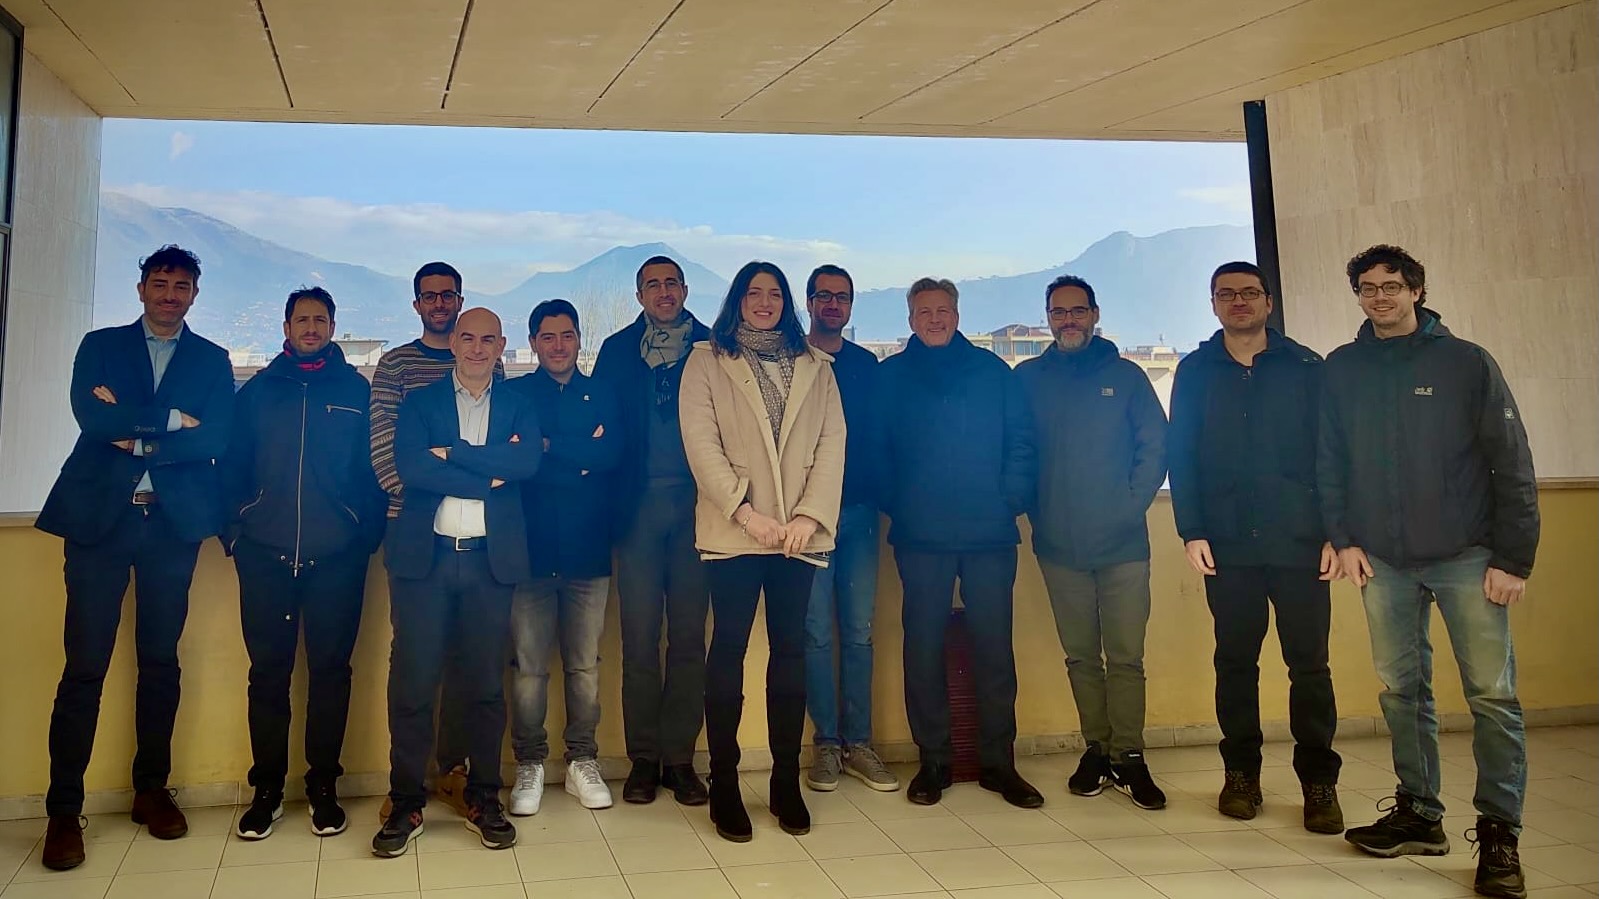 Successful KO Meeting for Project Islands at the University of Cassino